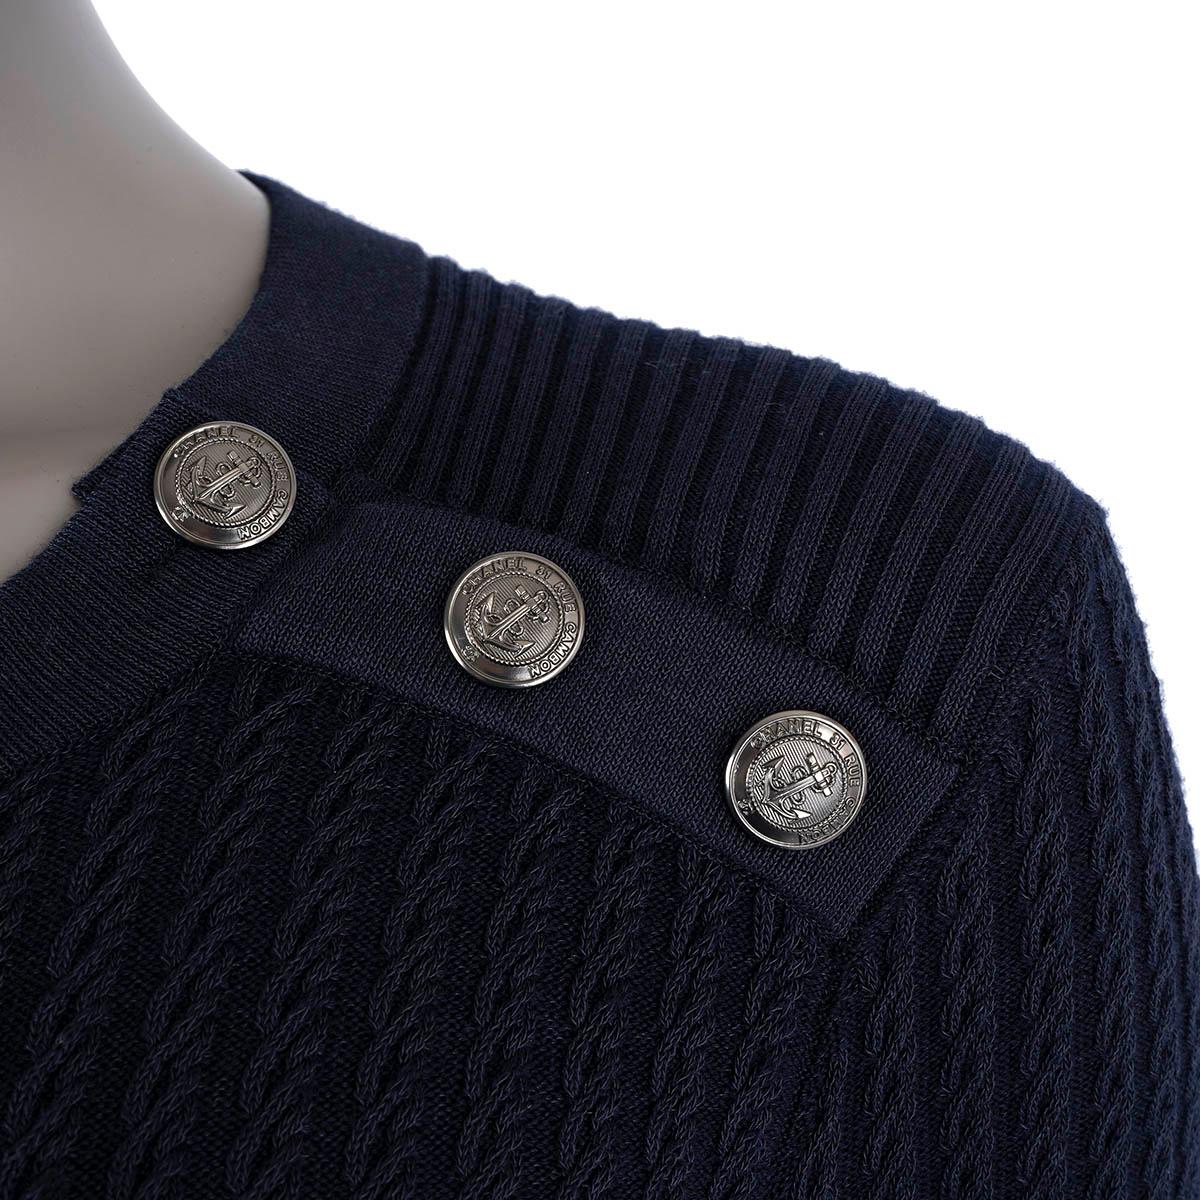 CHANEL navy blue cotton & wool 2018 18A HAMBURG BUTTONED NECK KNIT Dress 36 XS For Sale 2